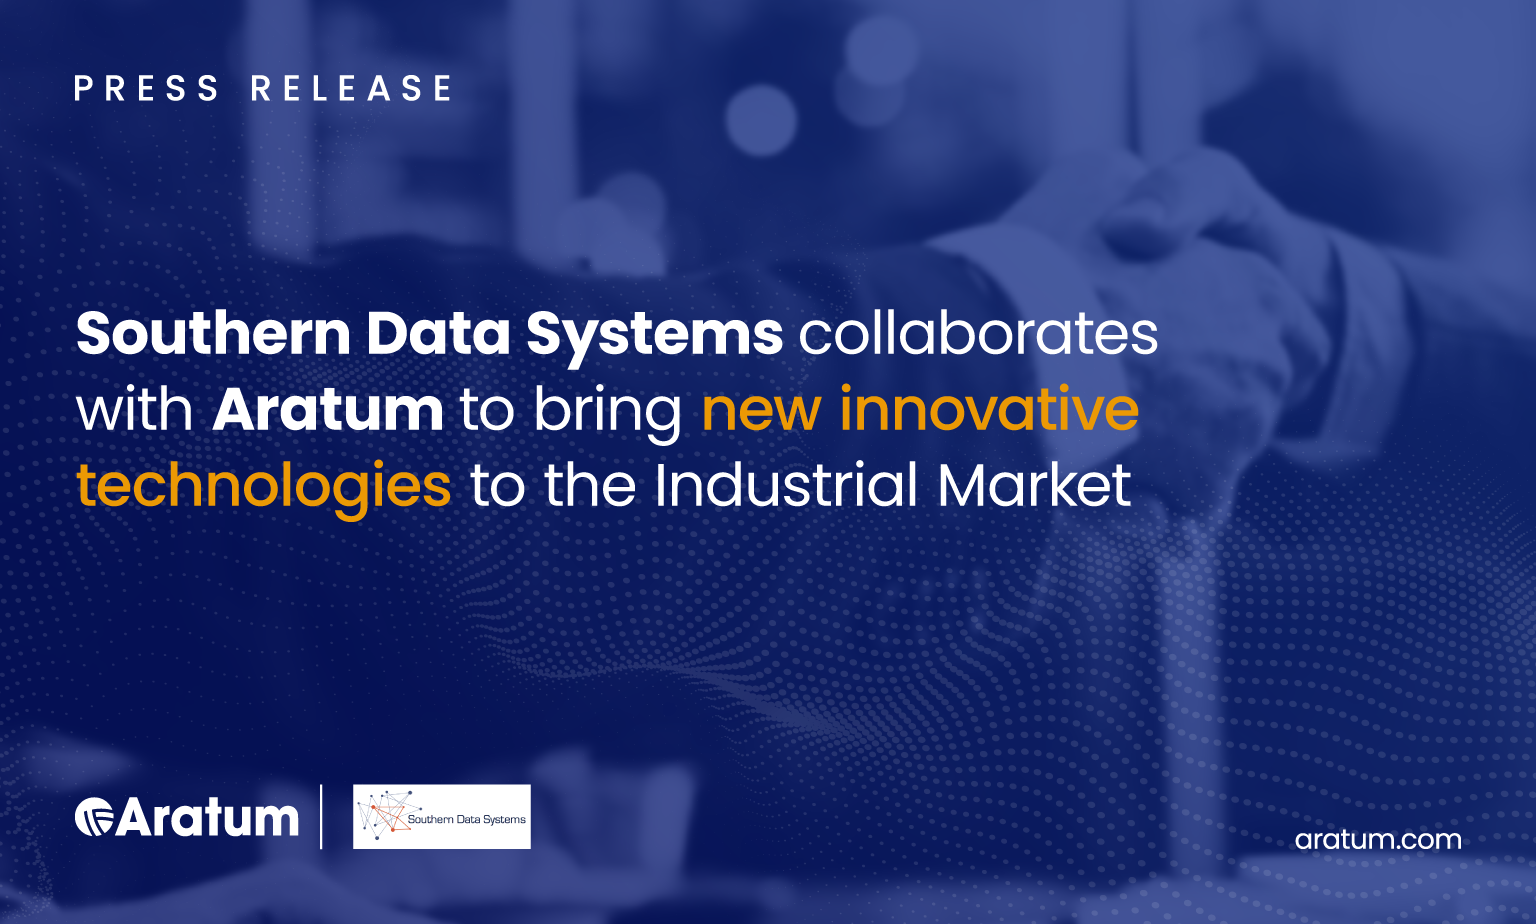 Aratum Collaborates with Southern Data Systems Inc. to Bring New Innovative Technologies to the Industrial Market